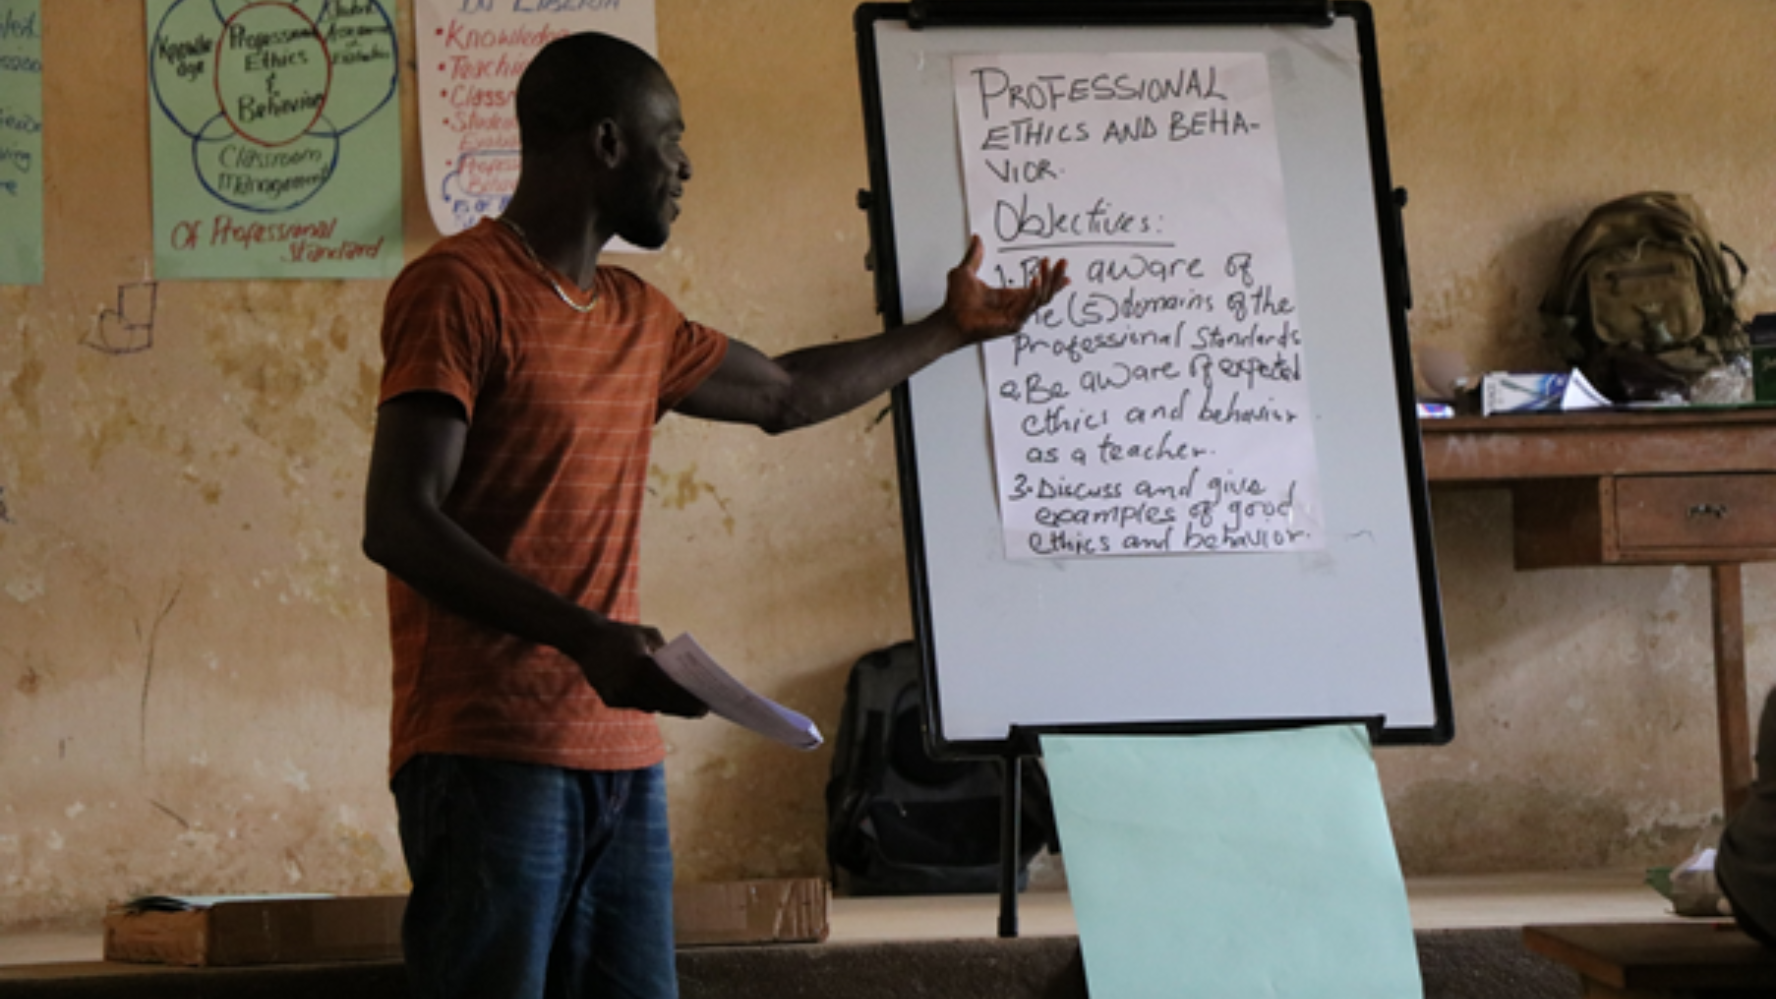 A man in a rural schoolroom standing in front of a whiteboard, on which is written 'Professional ethics and behaviour'.